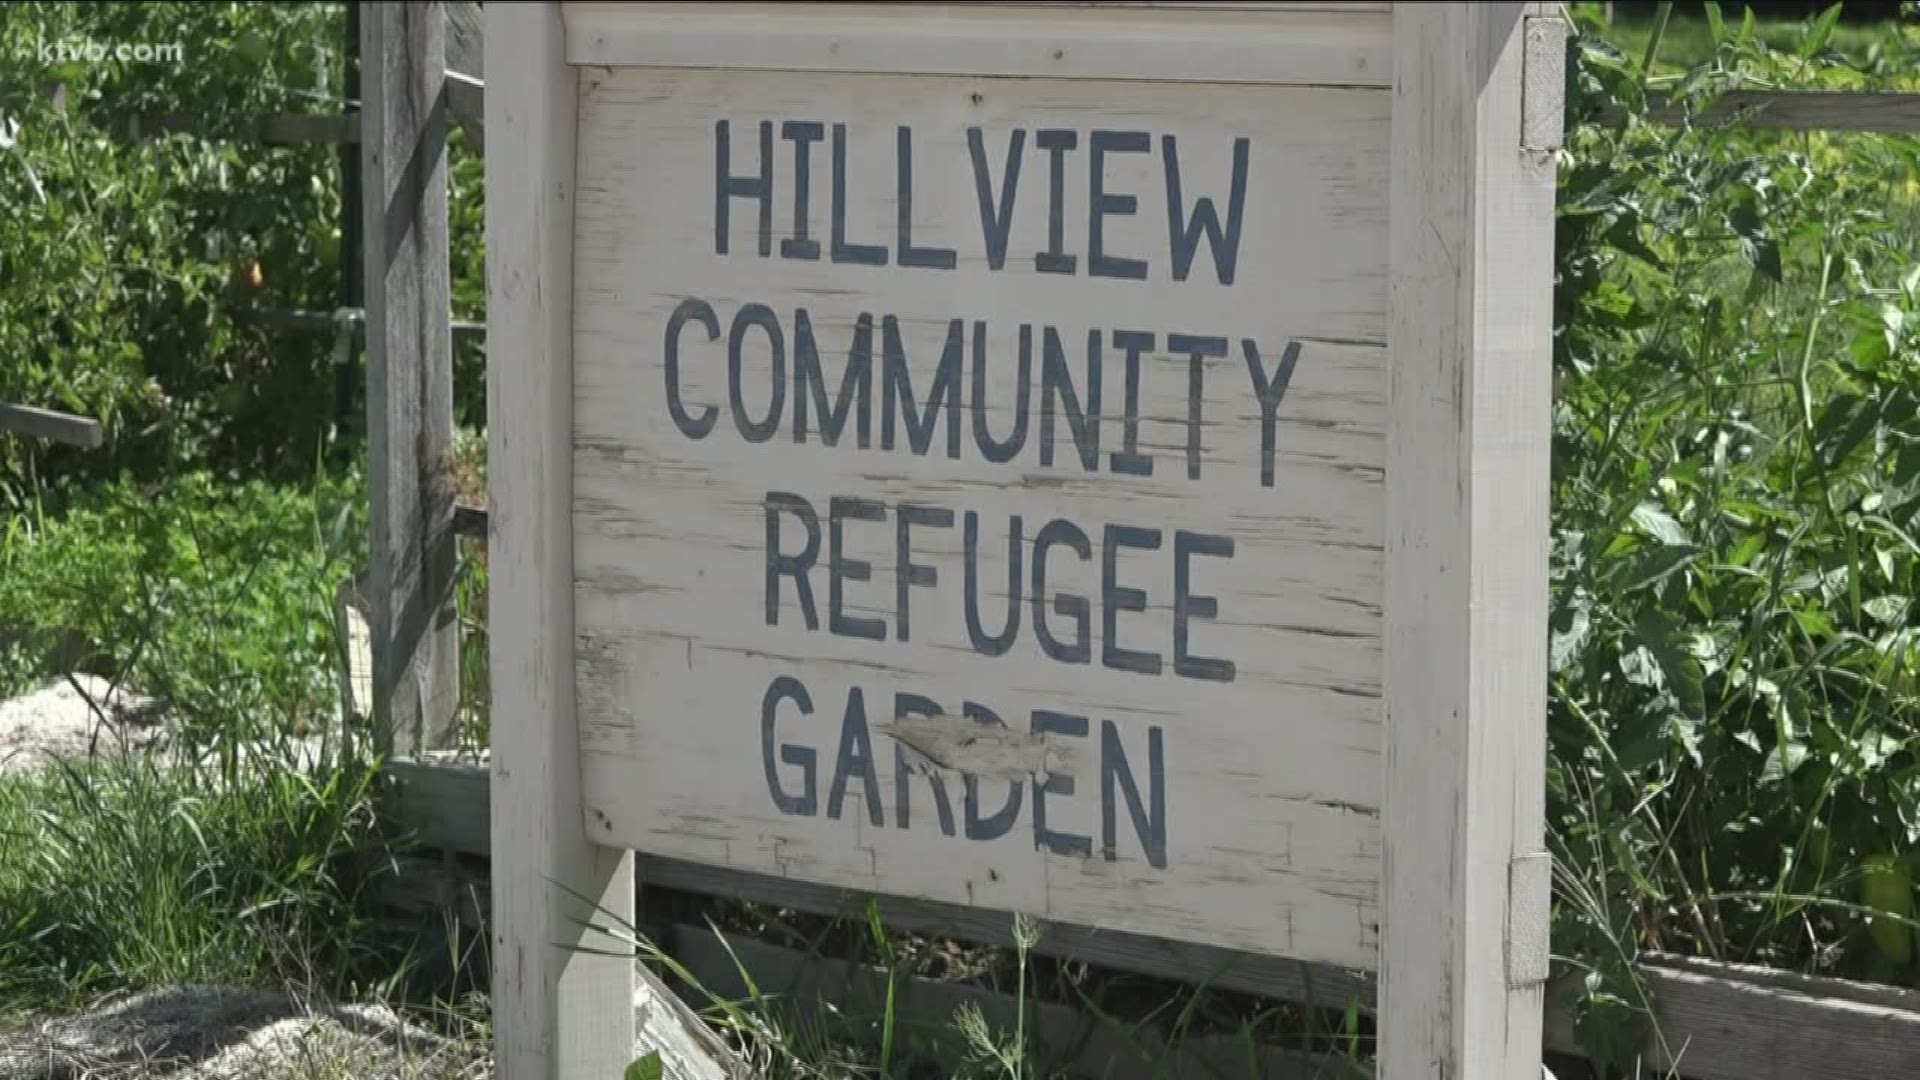 Vegetables were stolen from the Hillview Community Refugee Garden in Boise not once, but twice last week. Three suspects raided the garden with plastic bags, while the fourth suspect drove to the other end of the Hillview United Methodist Church parking lot to wait. A refugee gardener arrived during the crime, who watched it unfold but never approached the suspects.